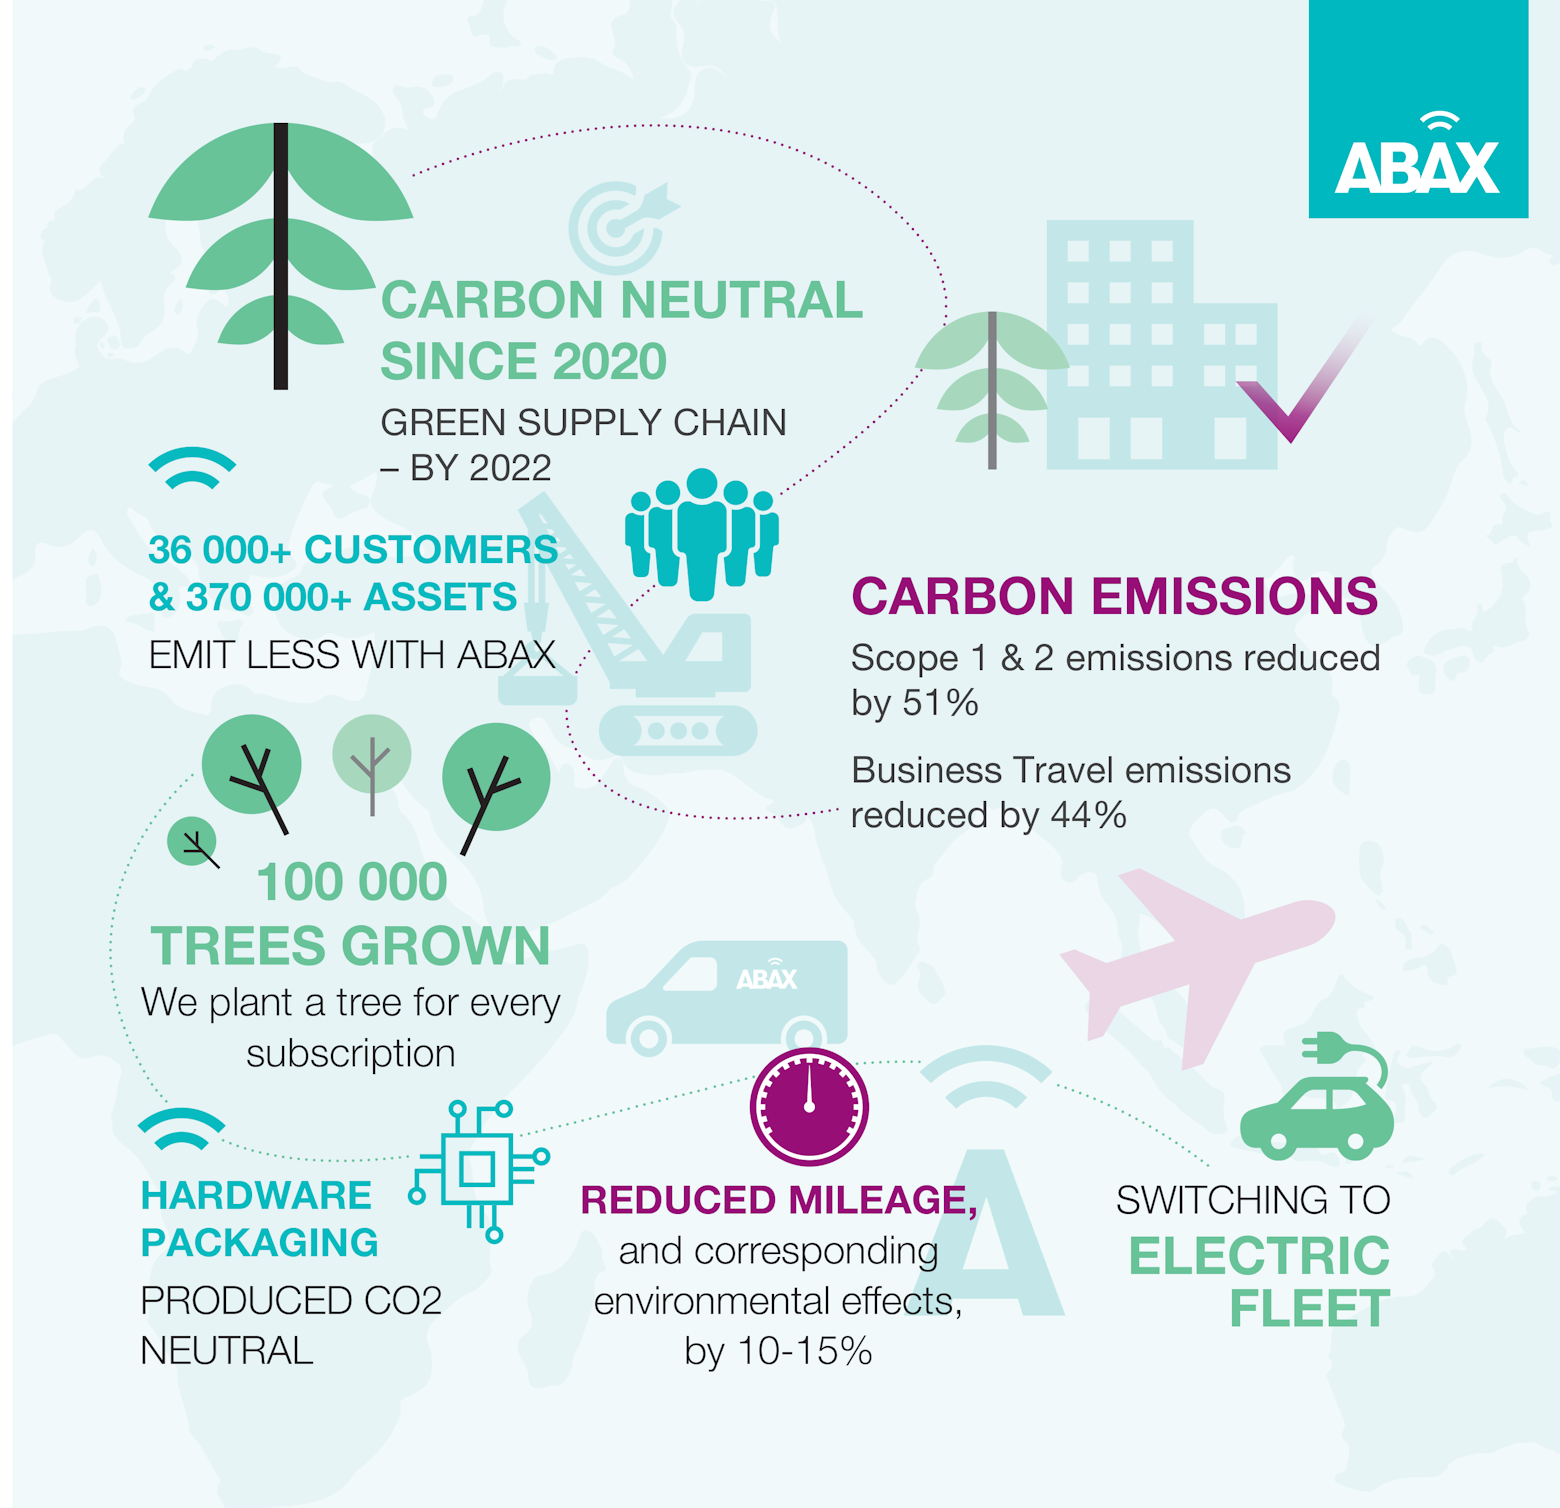 ABAX becomes Carbon neutral two years earlier than planned